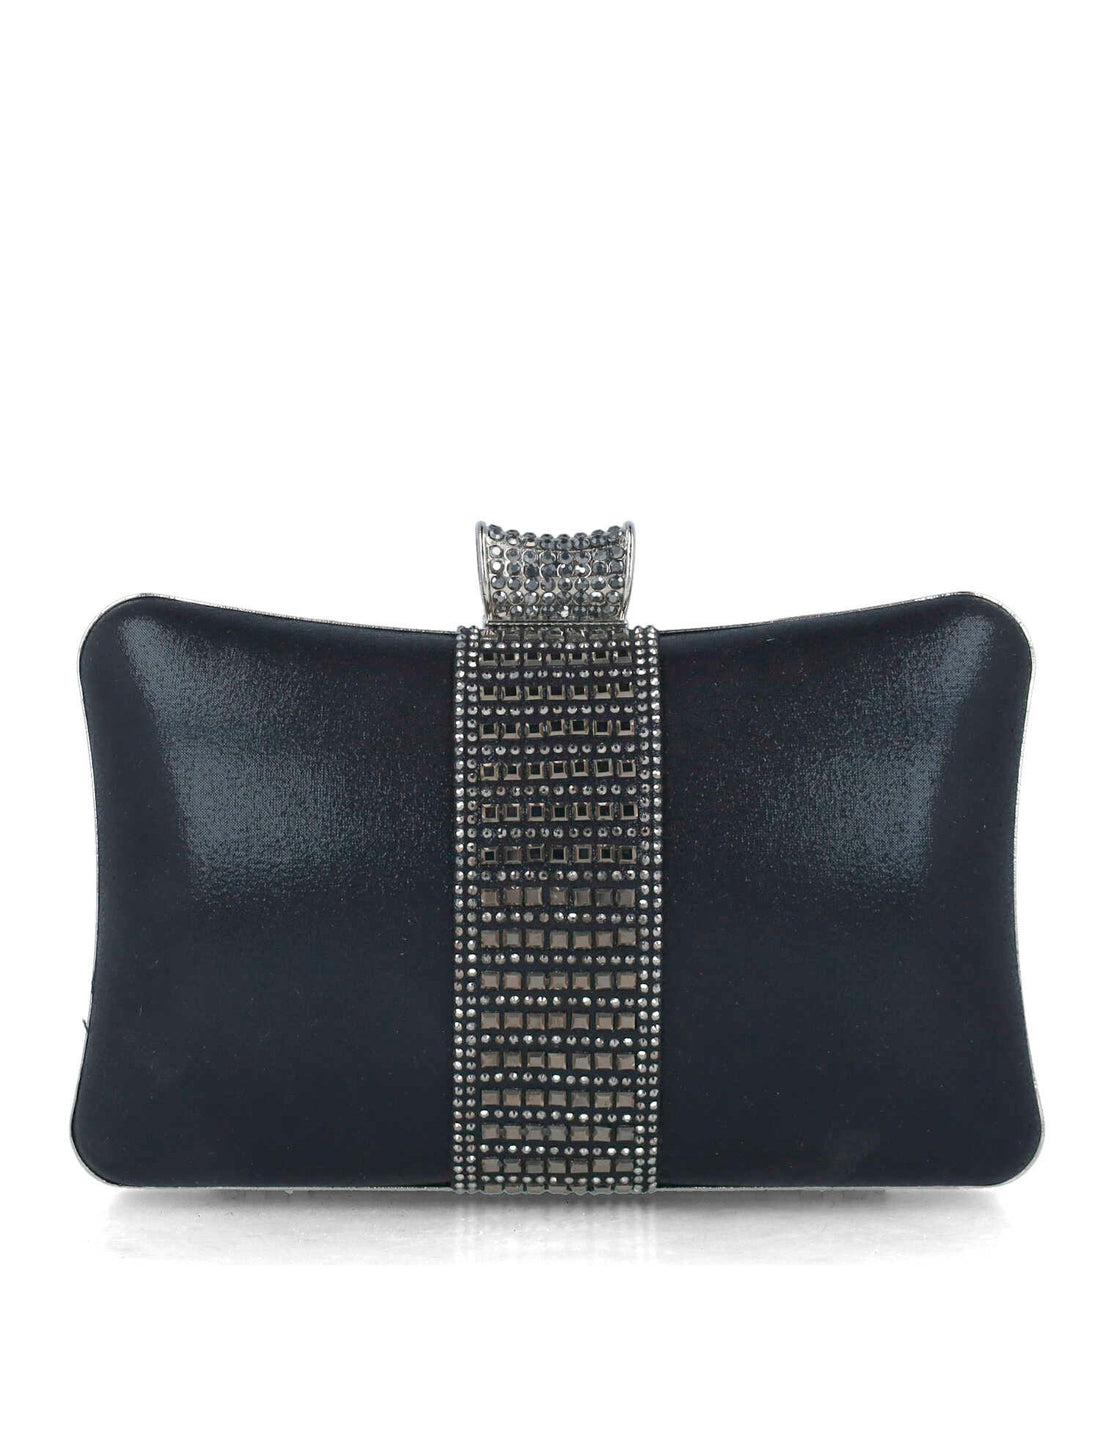 Black Clutch With Embellishment_85498_01_01